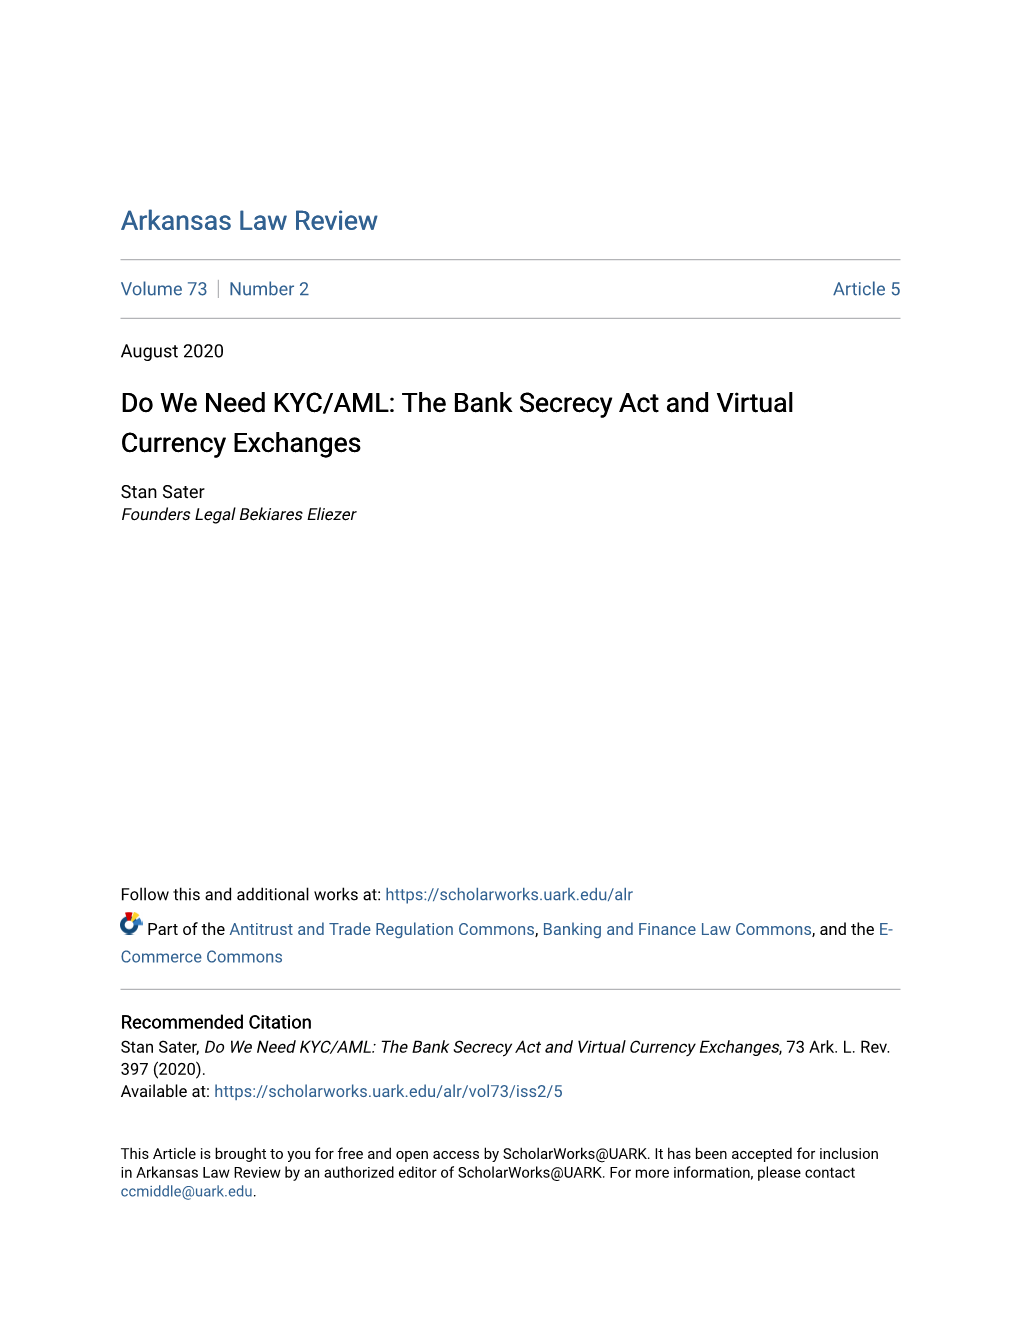 Do We Need KYC/AML: the Bank Secrecy Act and Virtual Currency Exchanges